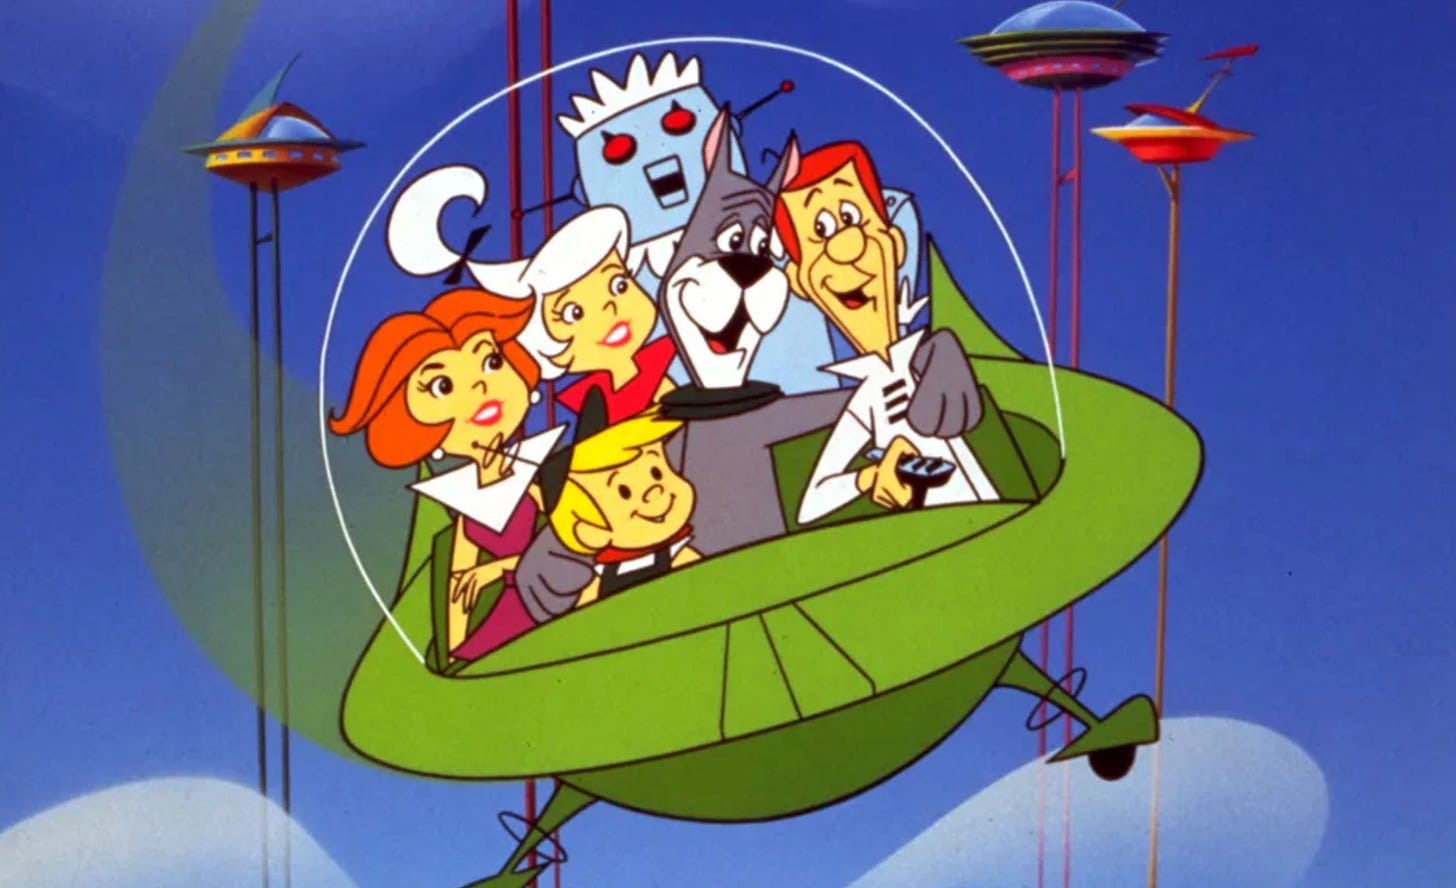 Illustration of The Jetsons